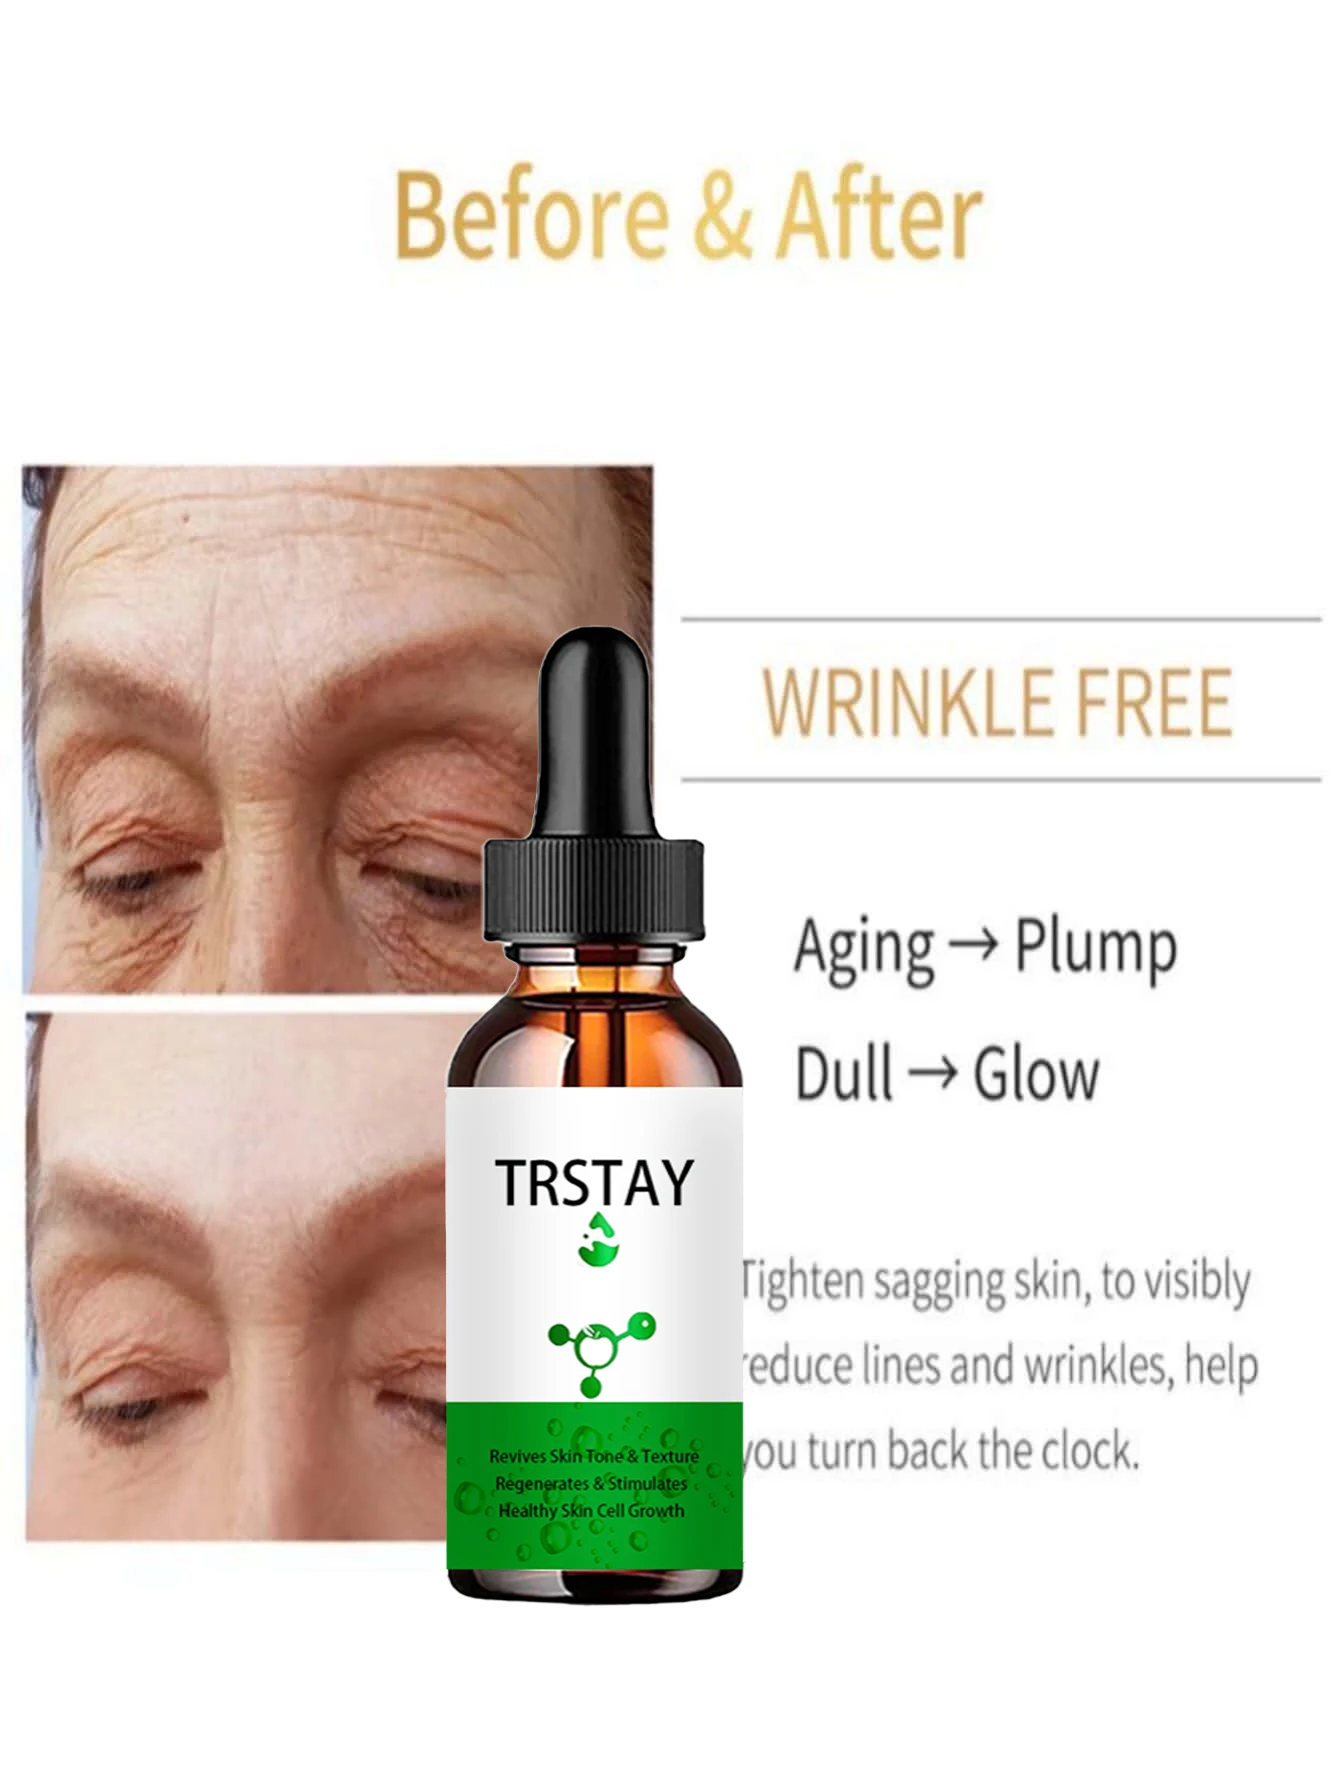 Retinol Lifting Serum Anti-Aging Collagen Essence Firming Facial Essential Oil Remove Wrinkles Fine Lines Tightening Skin Care